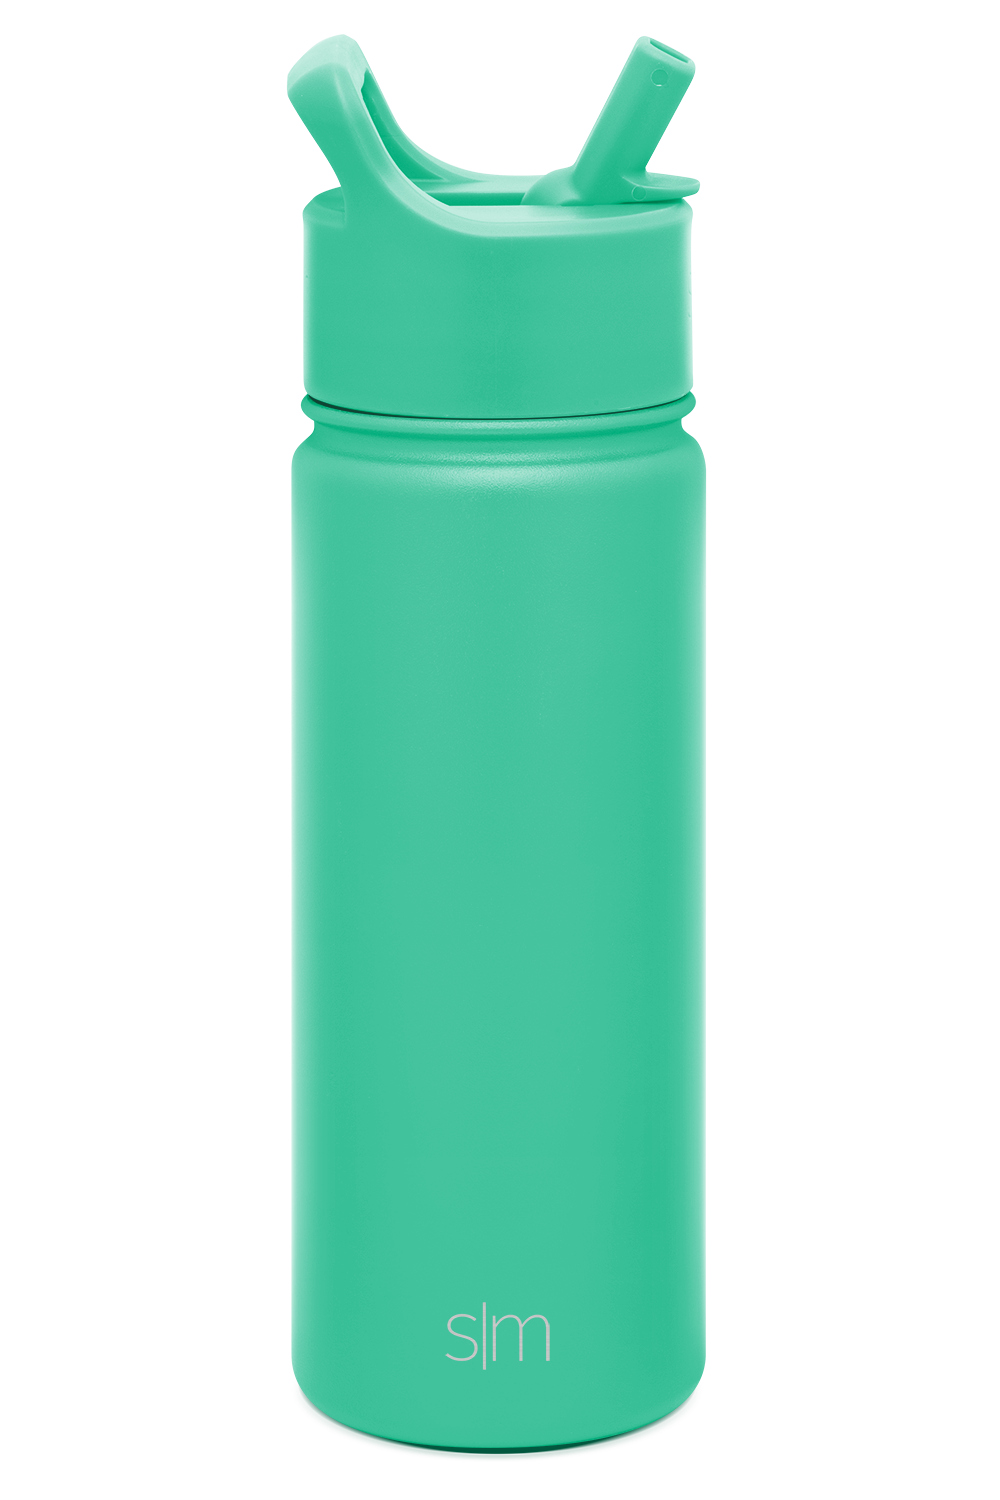 Simple Modern Kids Water Bottle with Straw Lid Vacuum Insulated Stainless Steel Thermos Bottles | Leak Proof Flask | Summit | 18oz, Island Jade